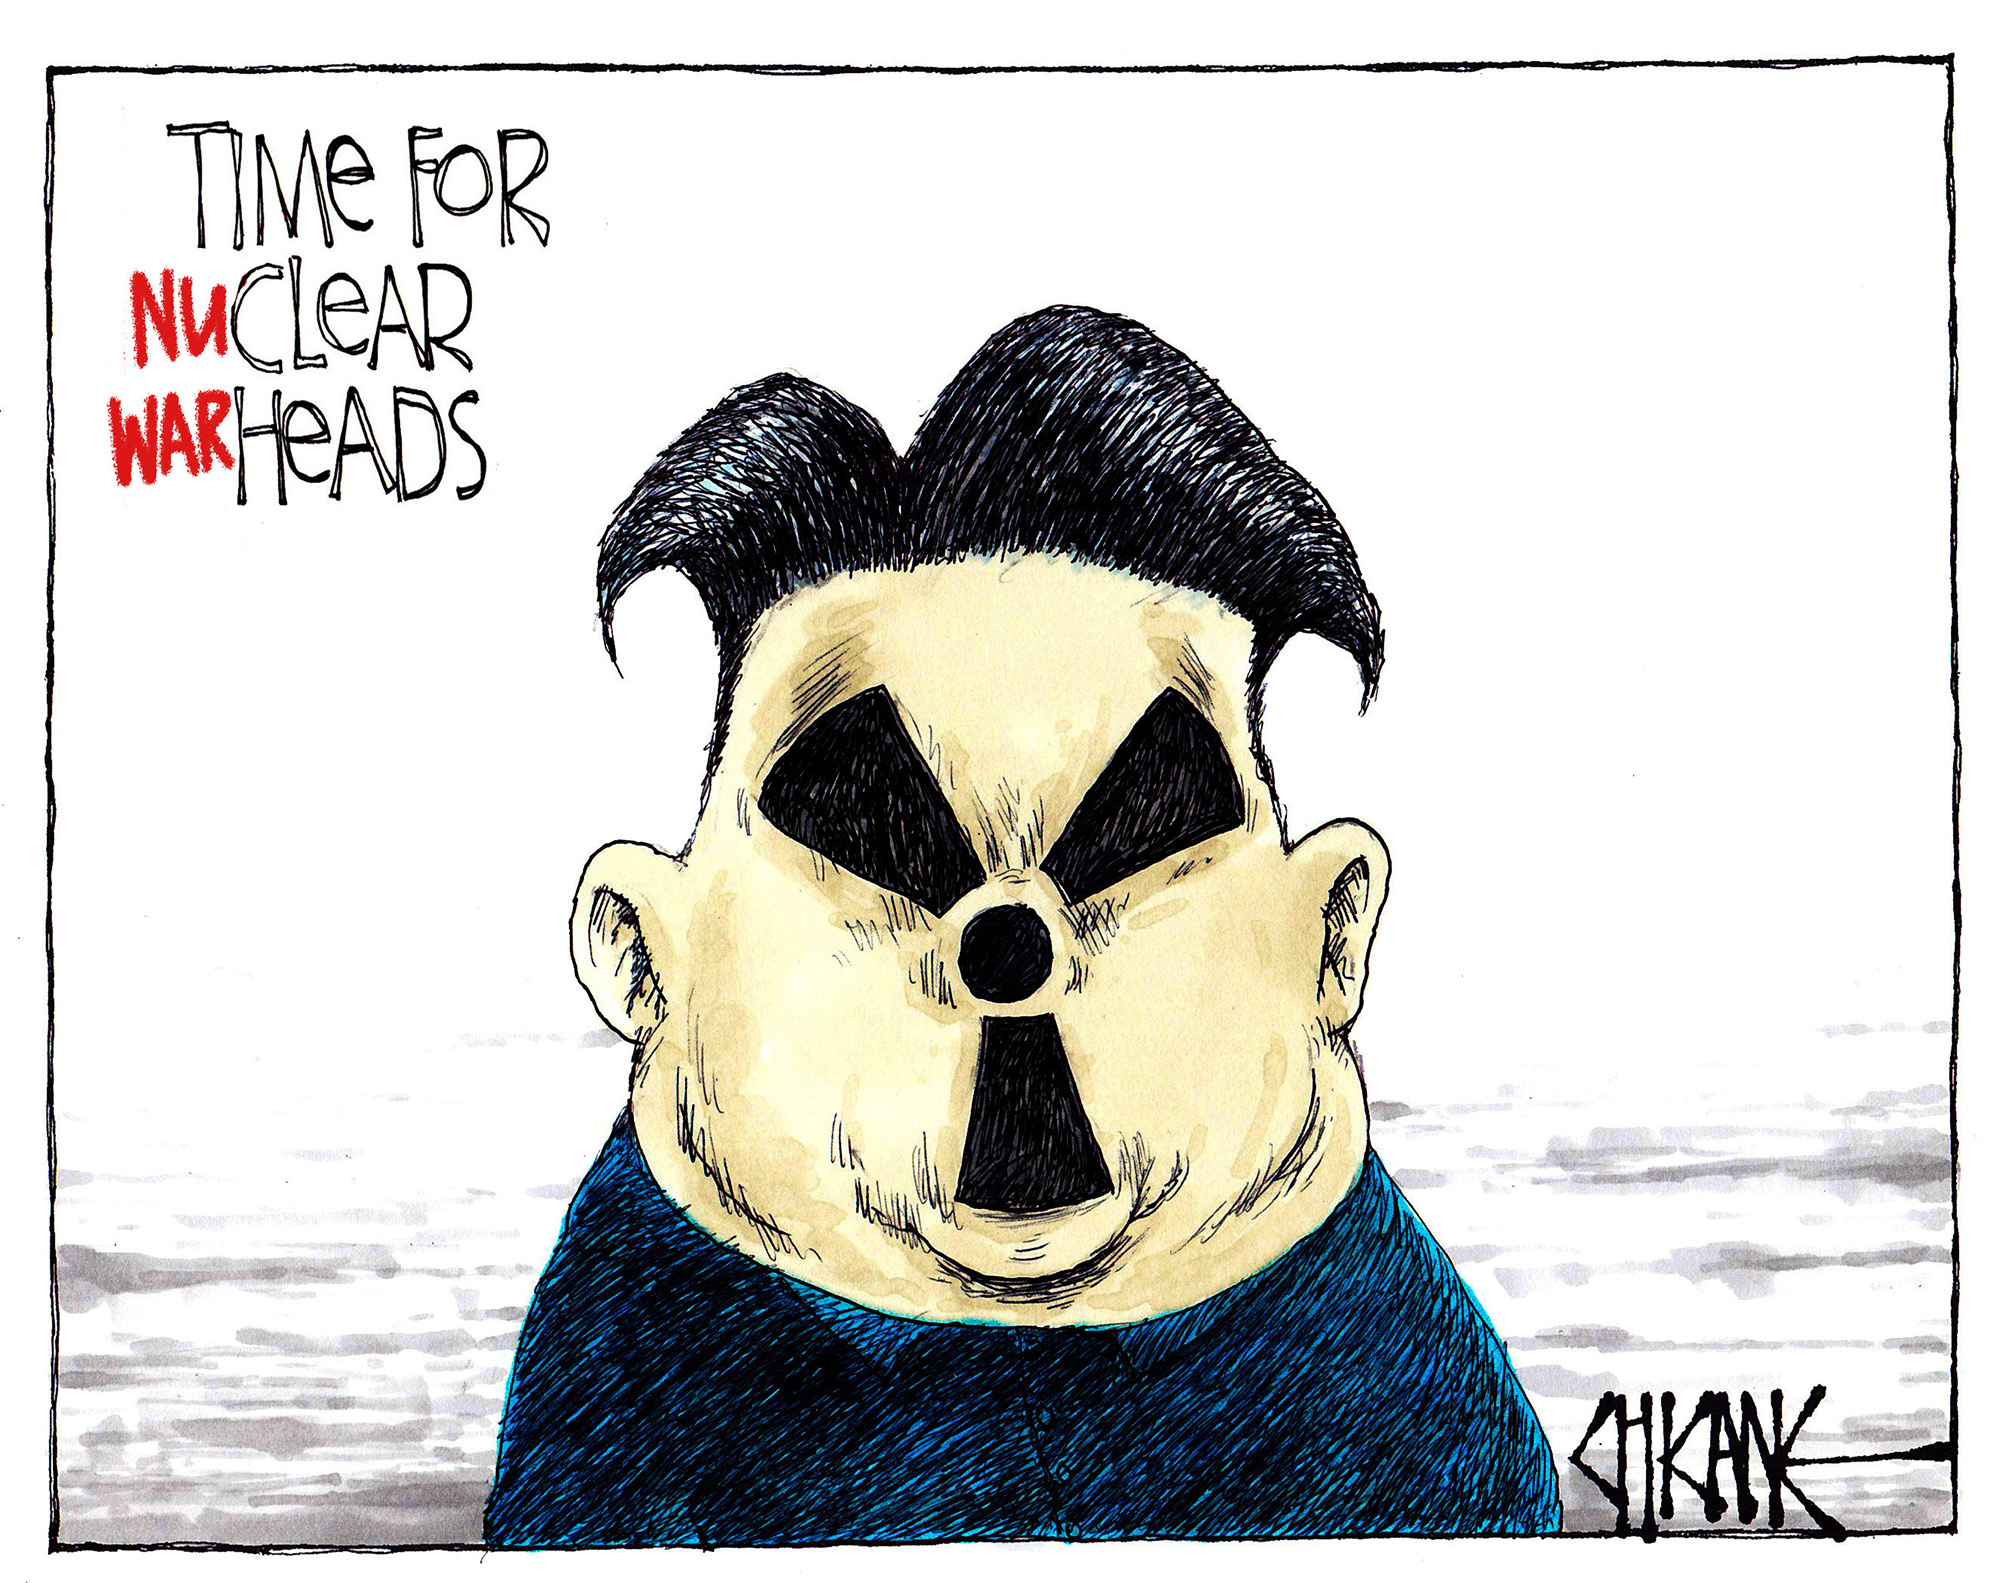 Time for (nu)clear (war)heads Kim Jong-un nuclear caricature. Cartoon by Chicane